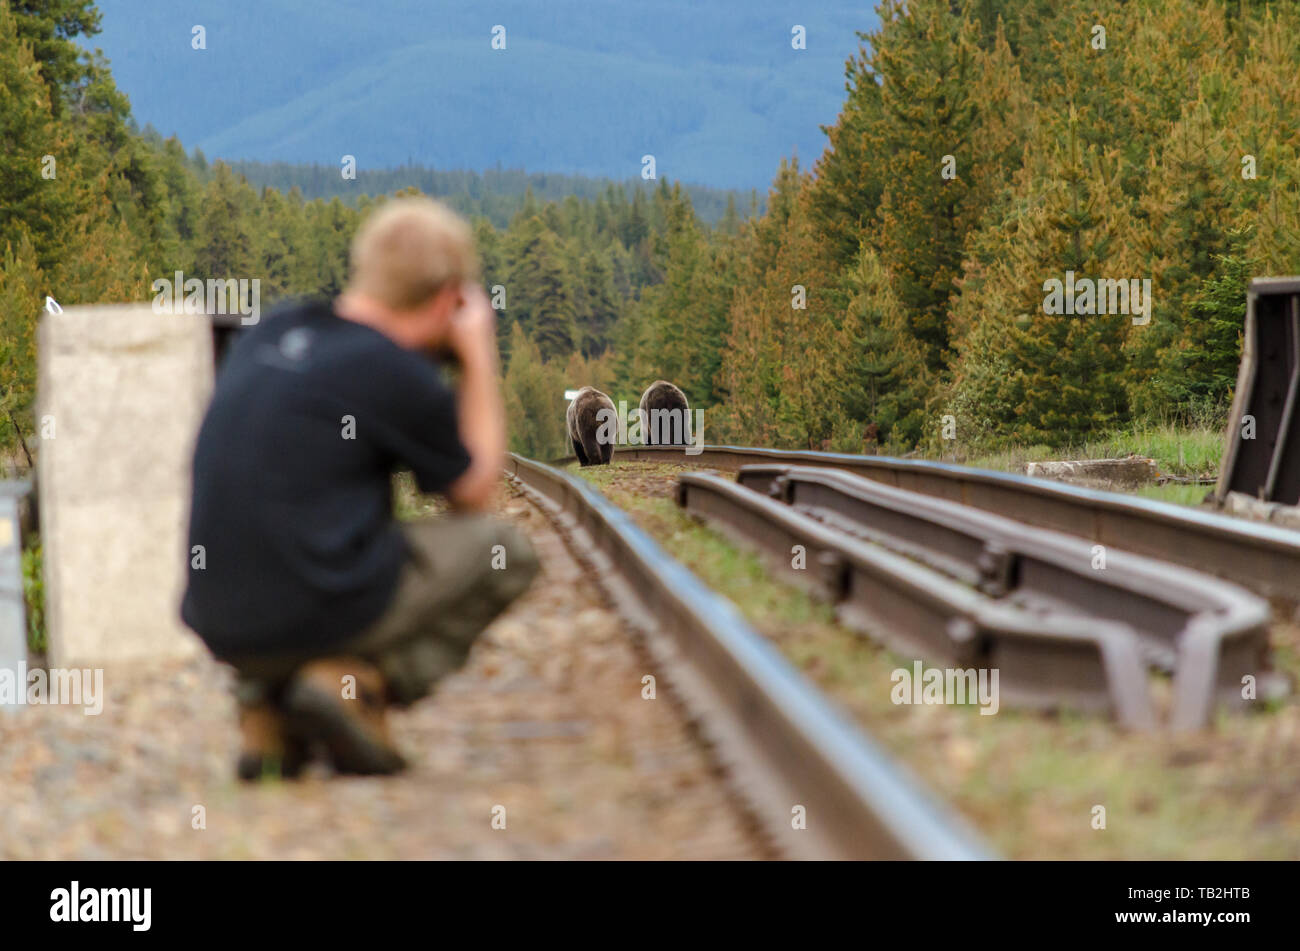 A photographer take a photo of two grizzly bears on the rail tracks , bears in focuses Stock Photo